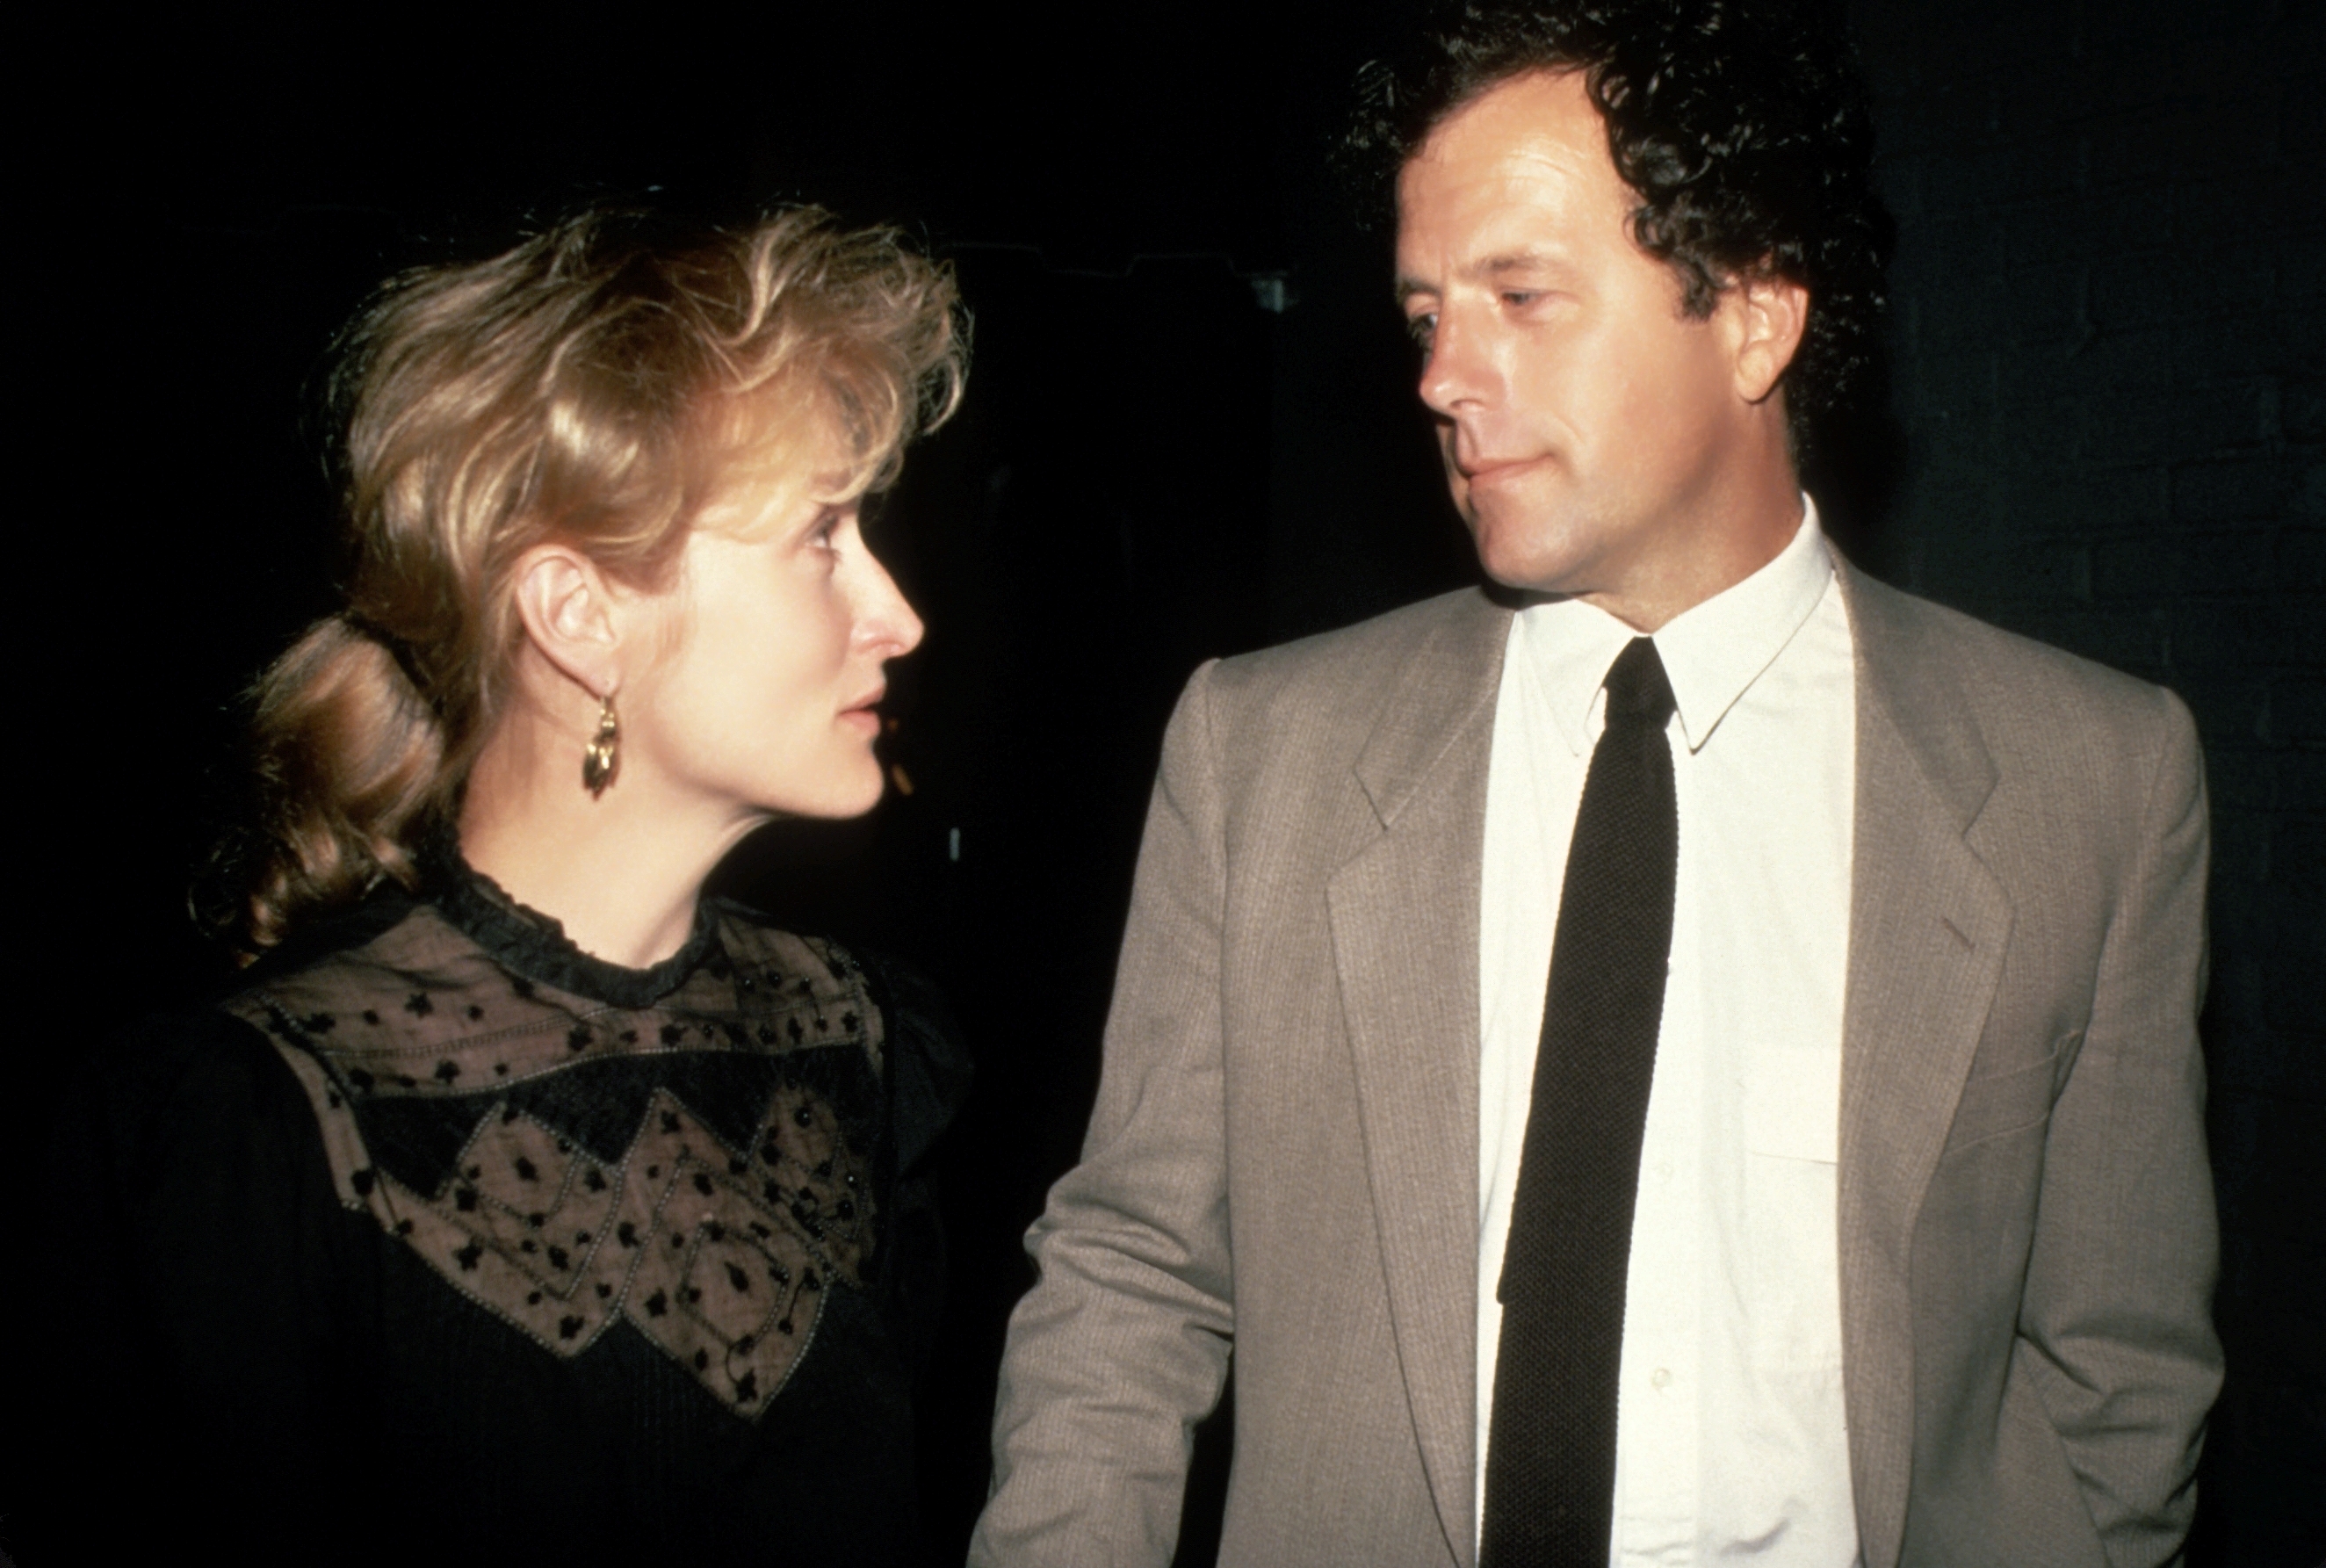 Meryl Streep and Don Gummer in 1984 in New York City | Source: Getty Images